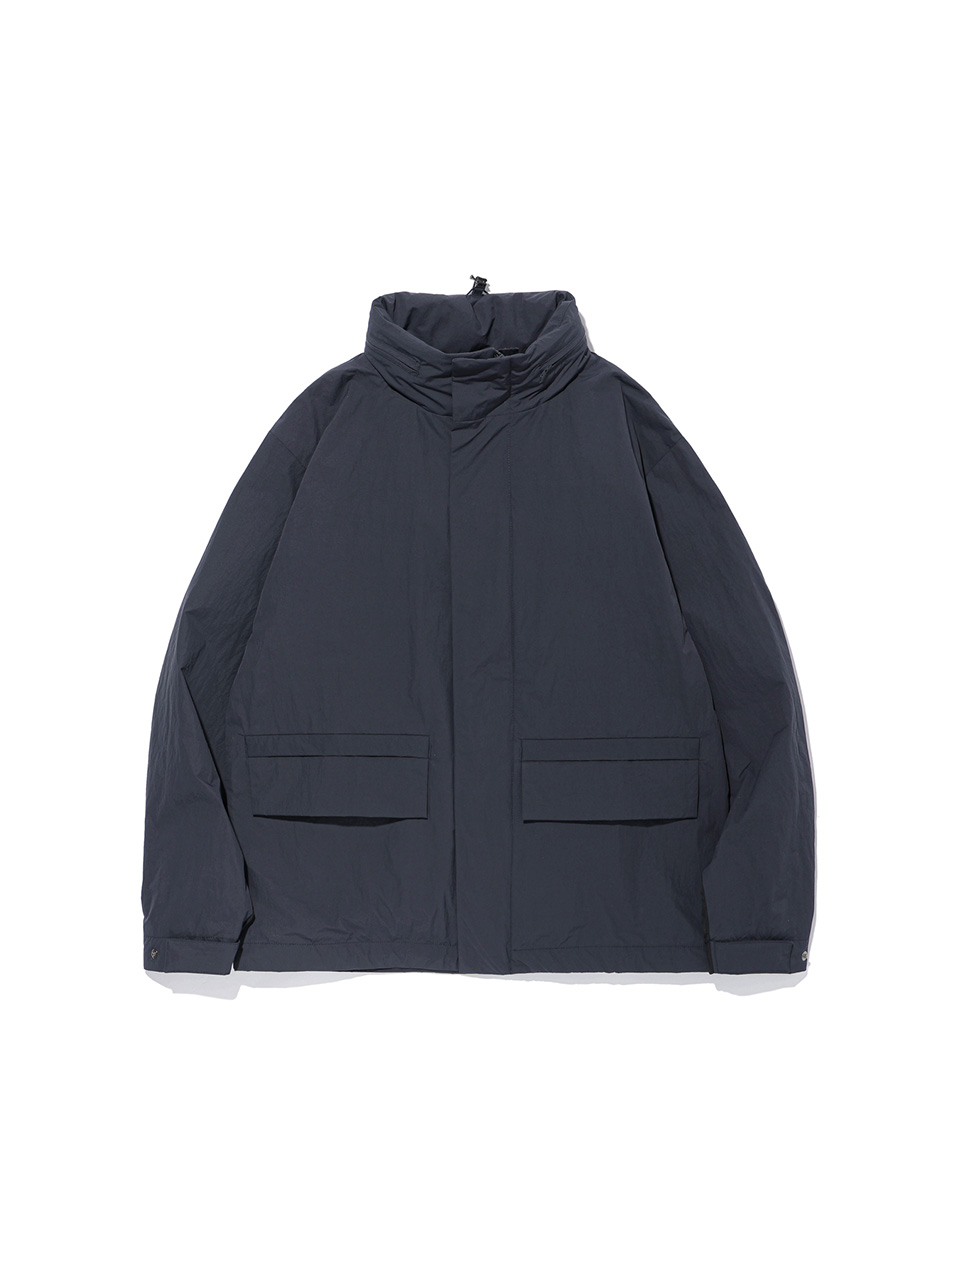 [Ourselves] TECHNICAL MONSTER JACKET (Dusty navy)